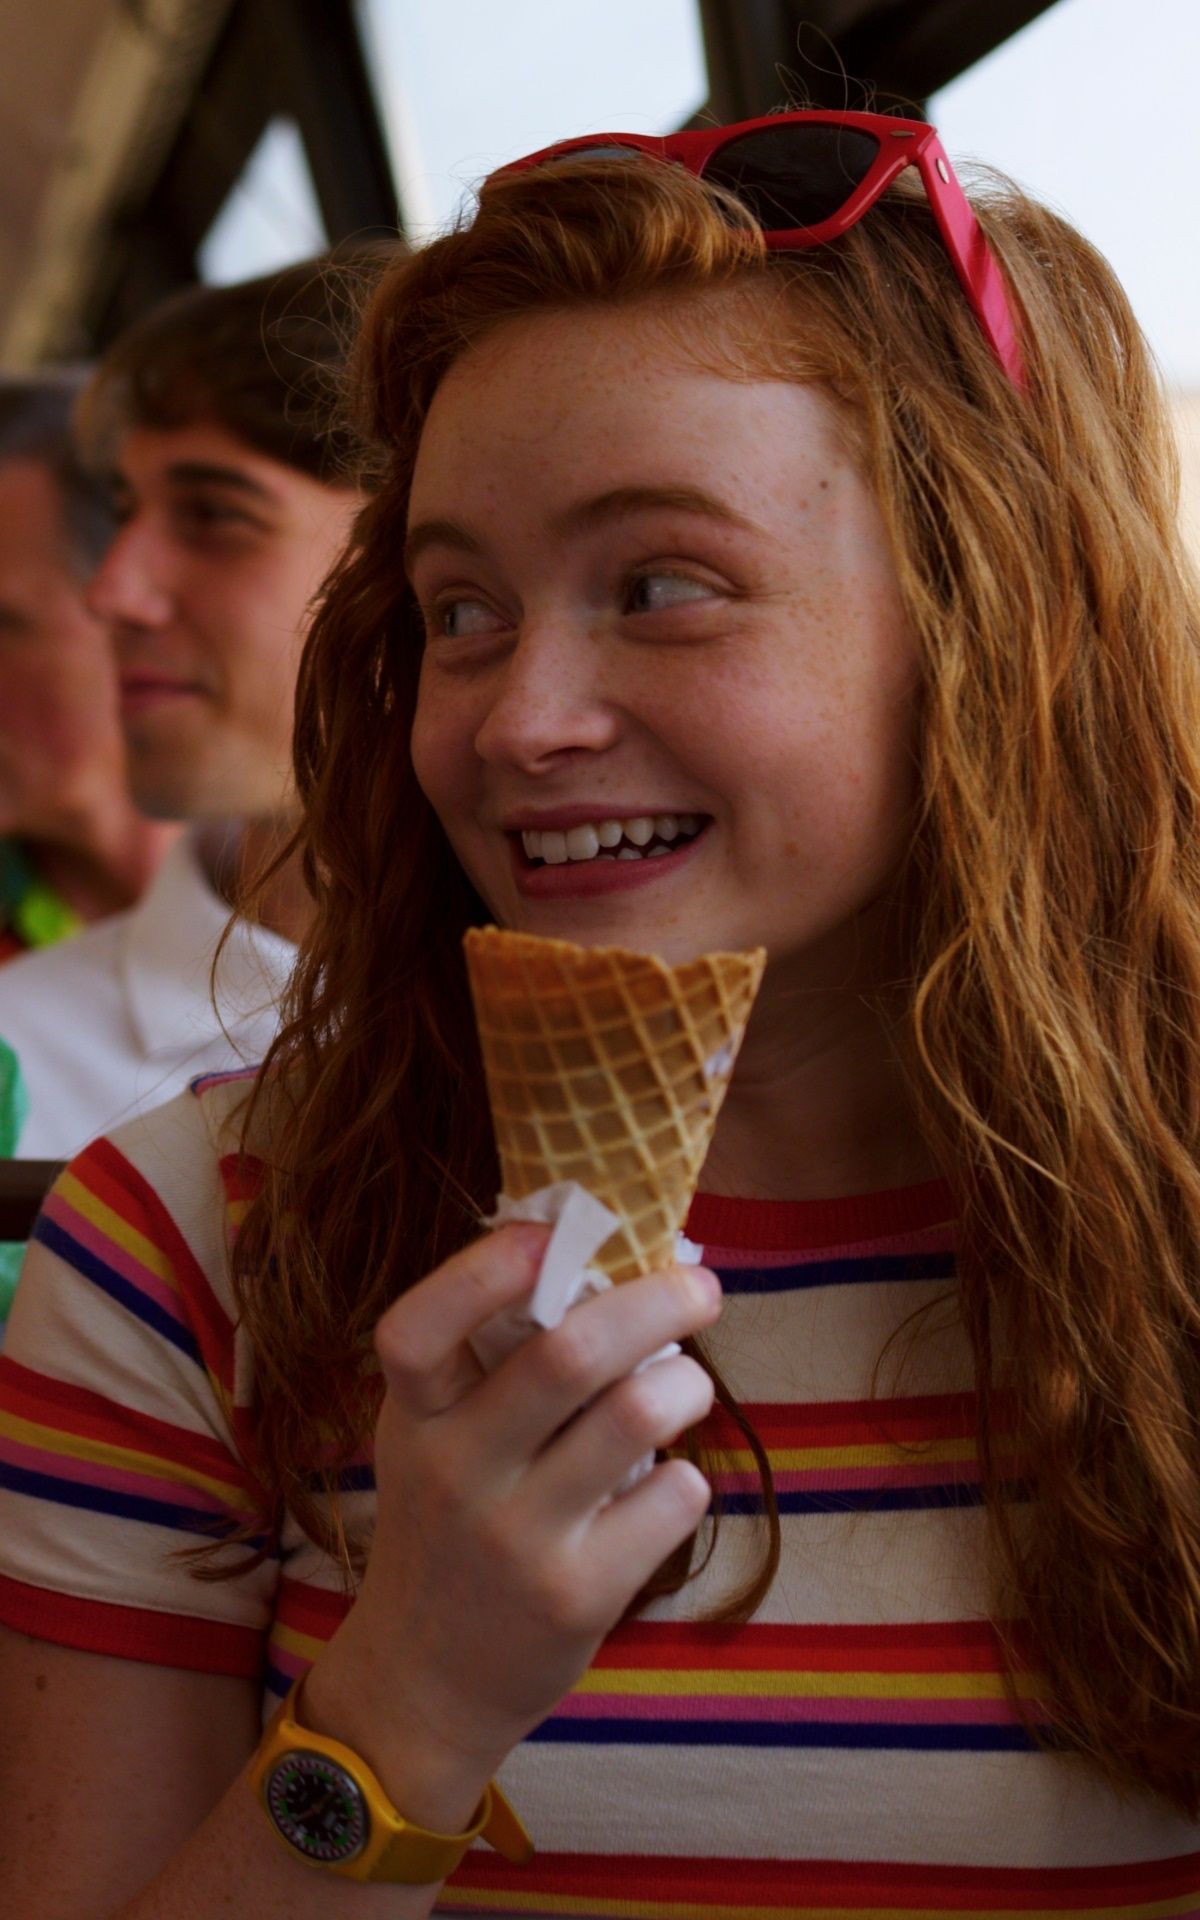 A girl with red hair and a rainbow striped shirt eats an ice cream cone. - Stranger Things